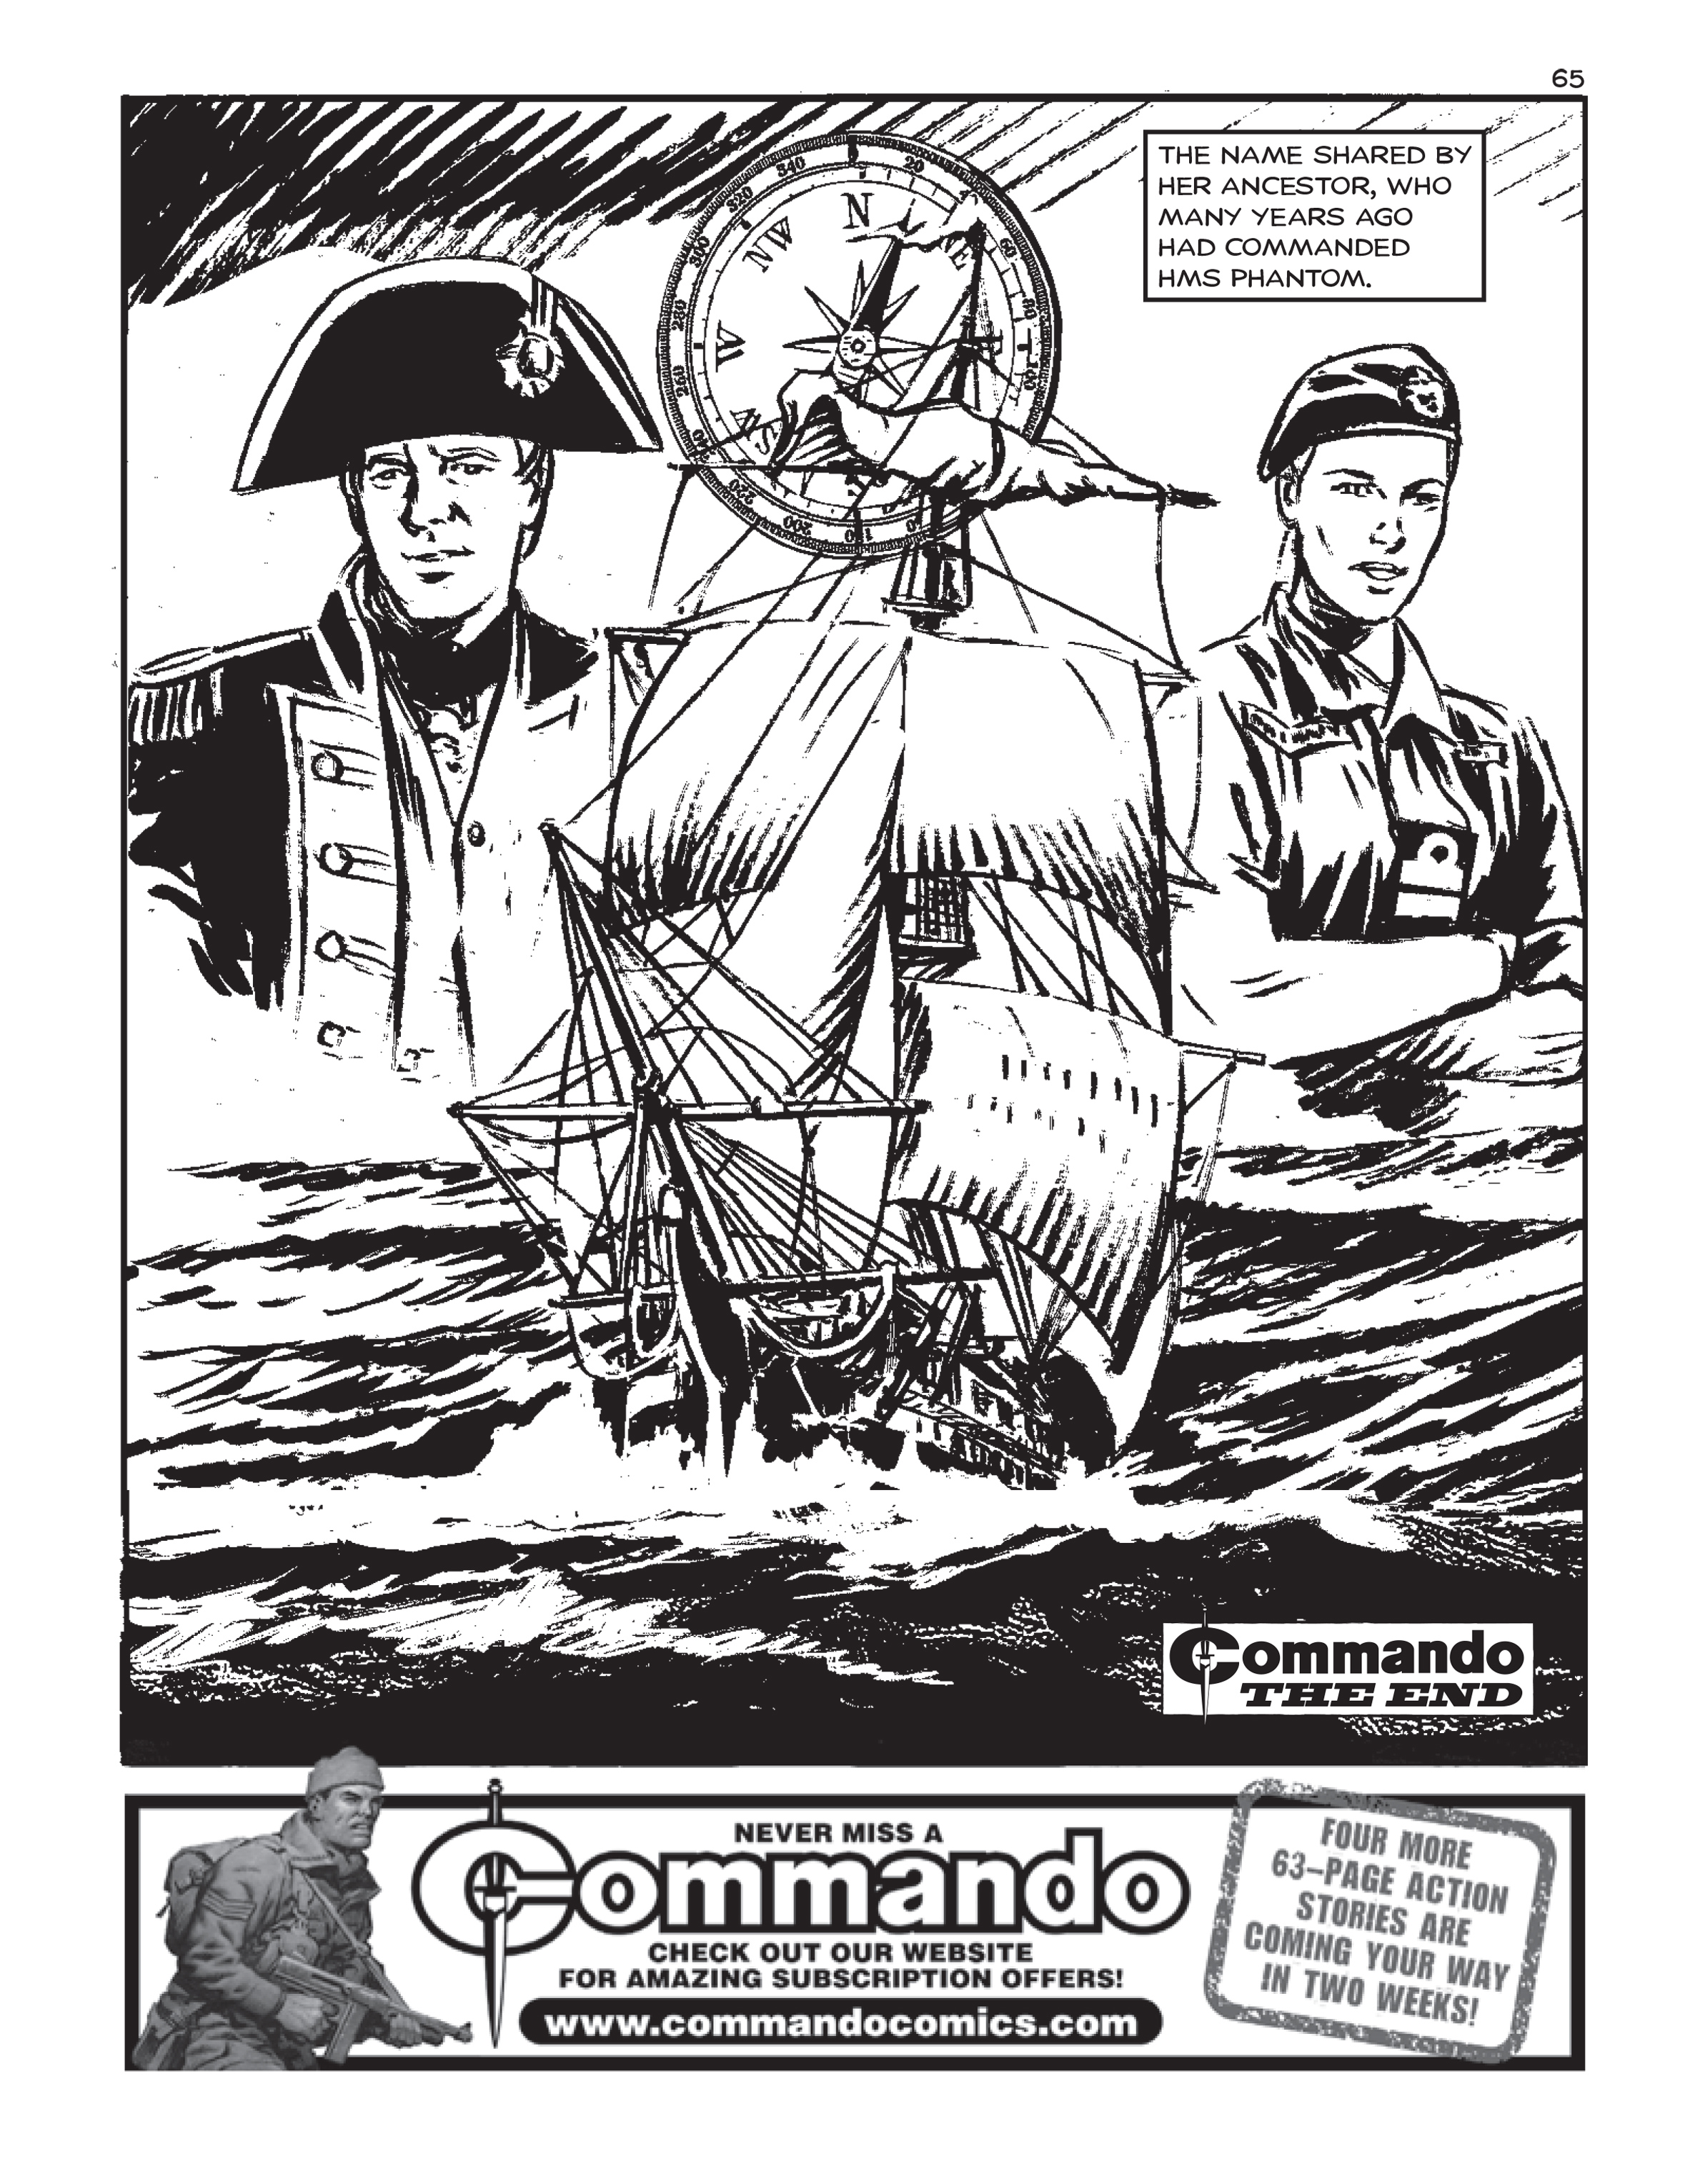 Read online Commando: For Action and Adventure comic -  Issue #5223 - 64